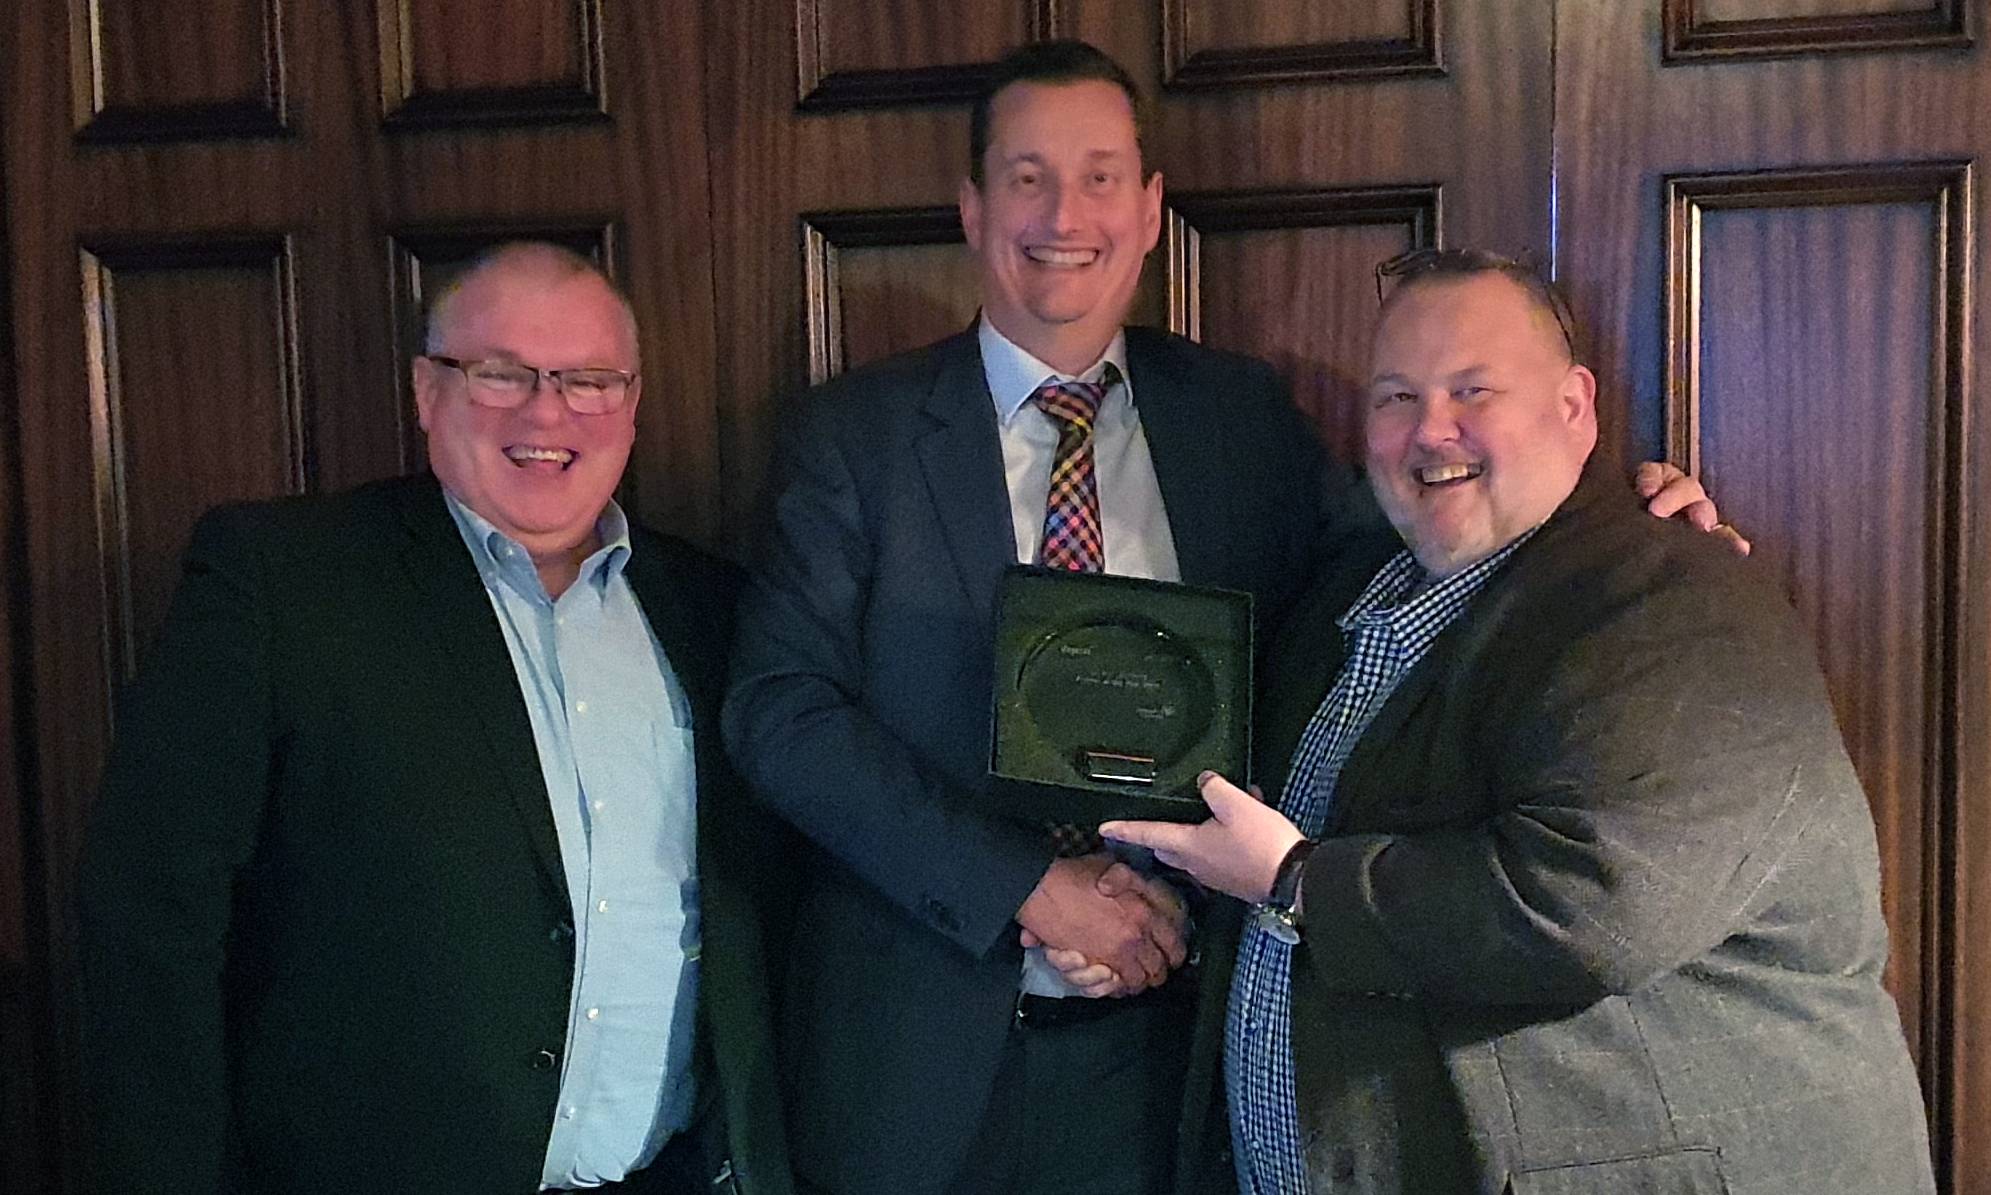 C-CURE 2019 Partner of the Year Announced